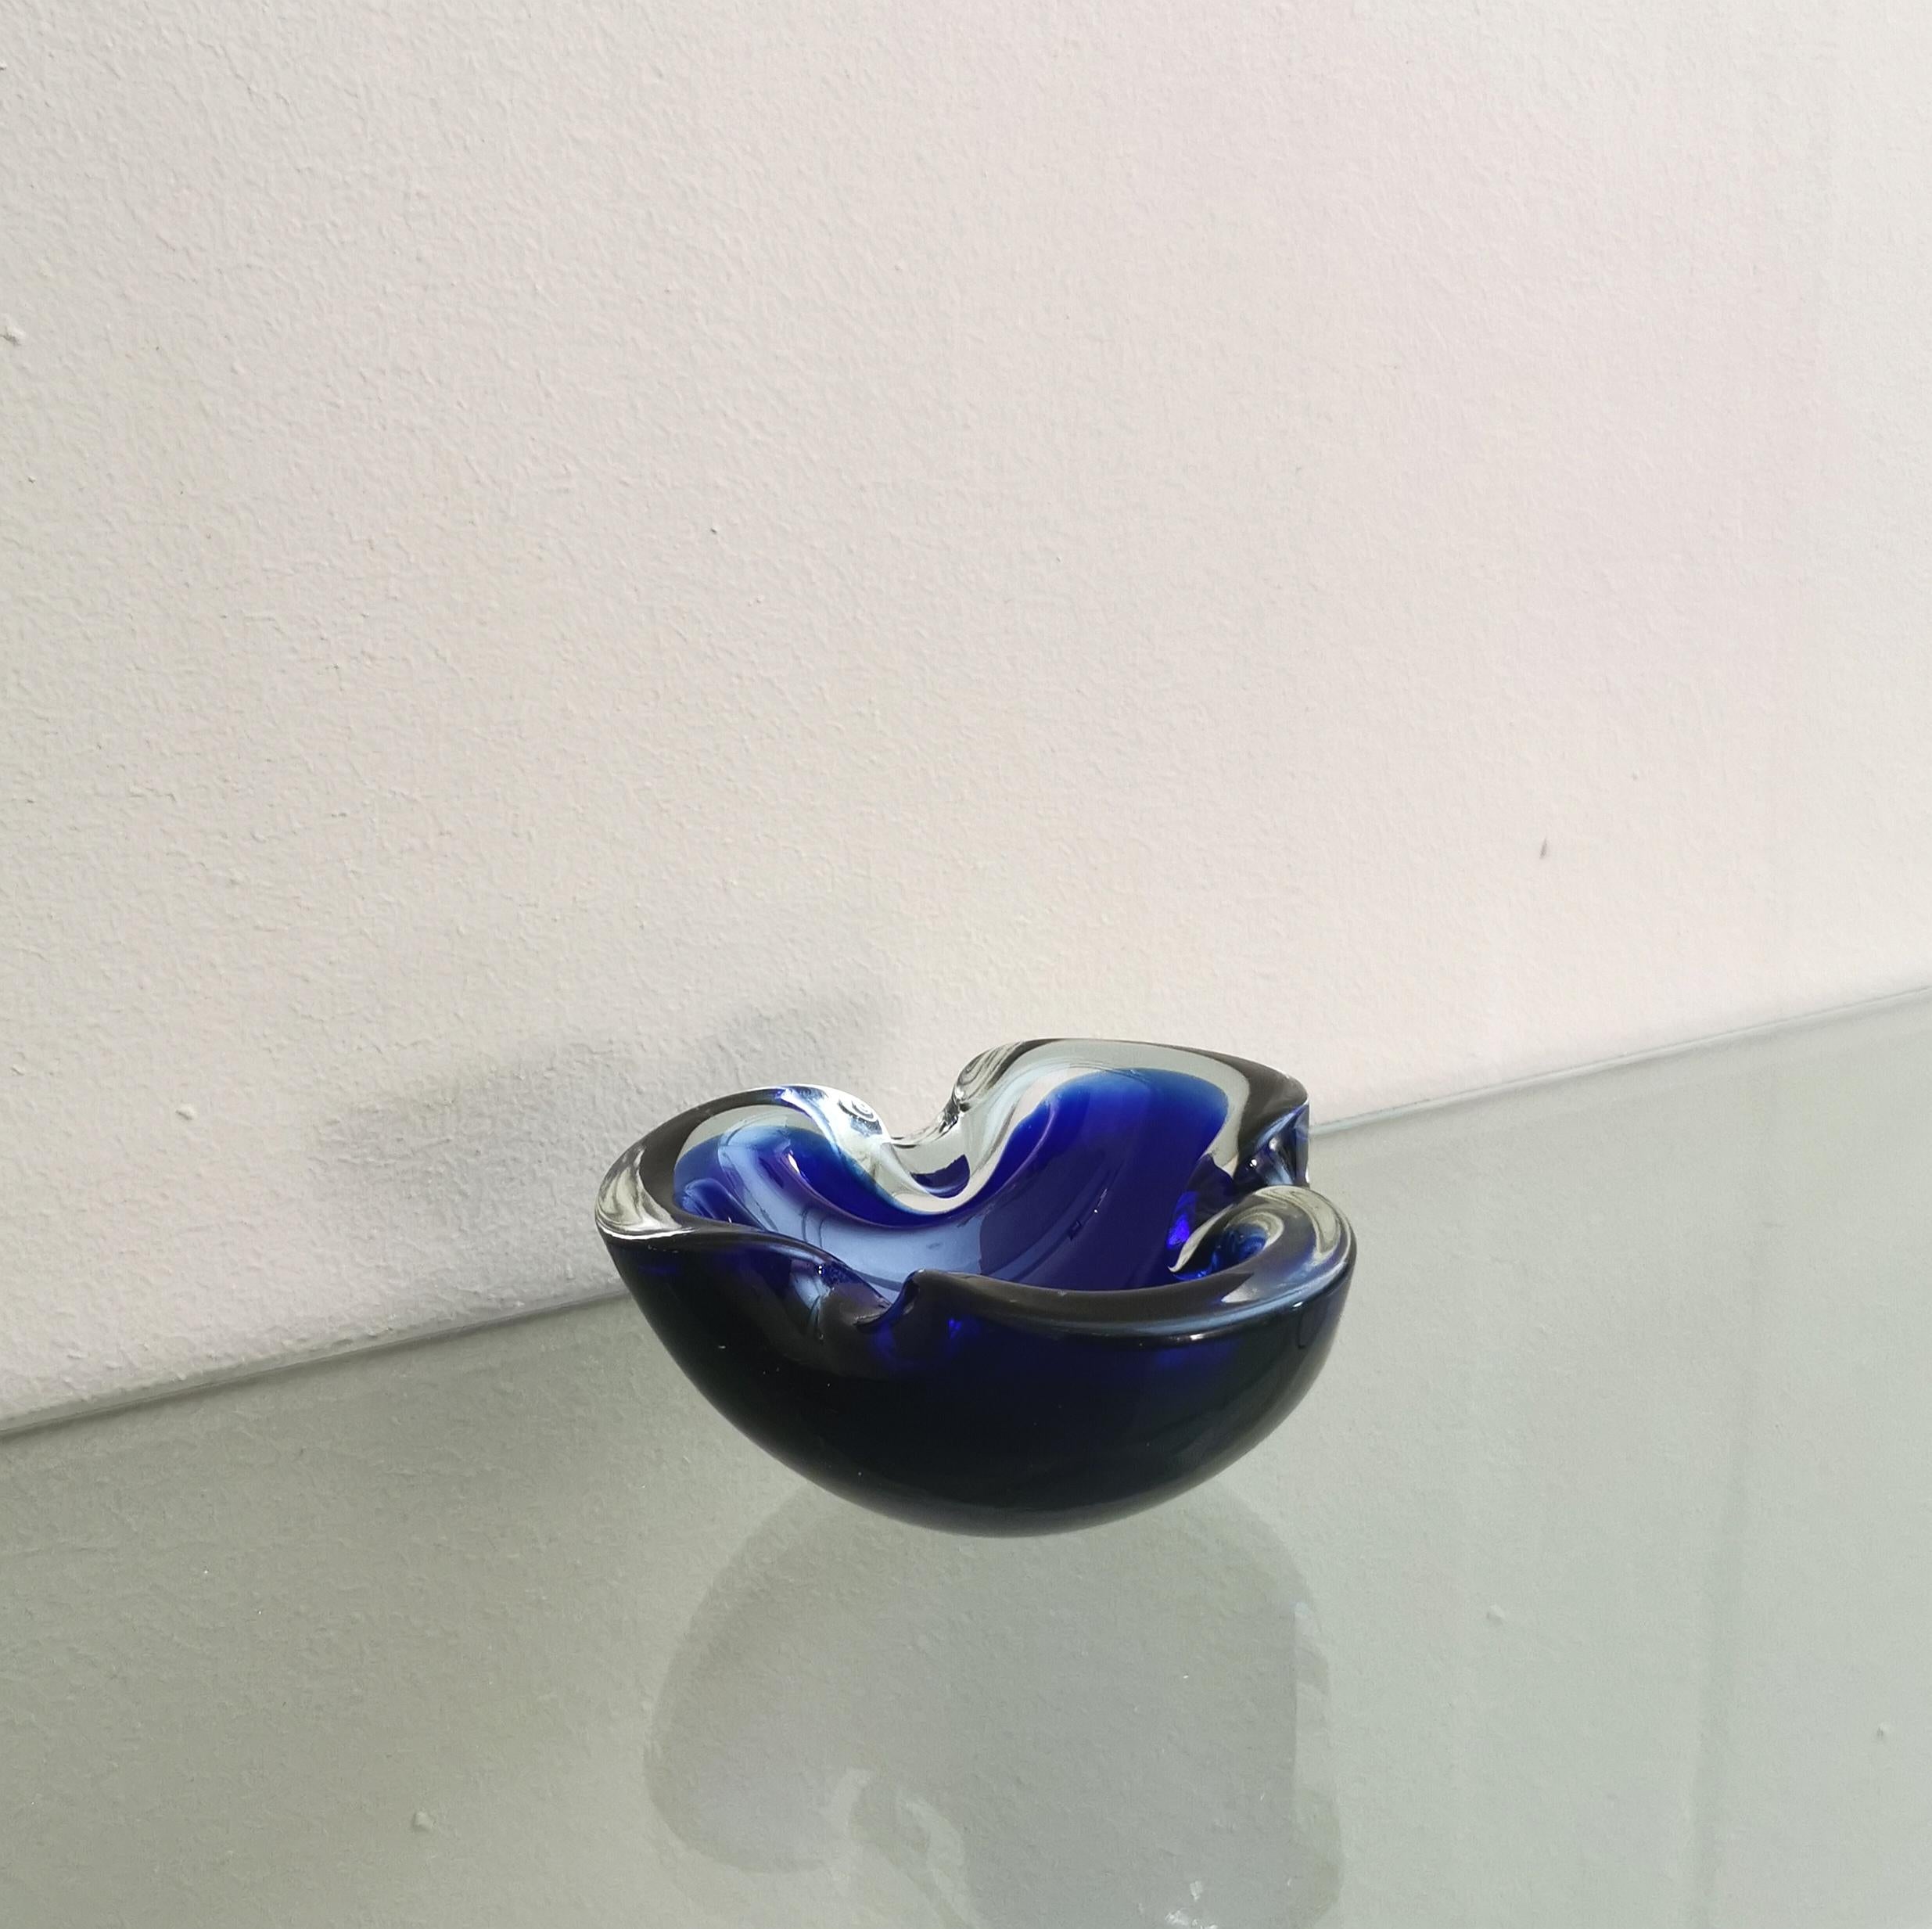 Ashtray with sinuous lines produced in Italy in the 70s by the Italian designer Flavio Poli.
The ashtray was made of Murano glass, in shades of midnight blue and transparent with the famous 